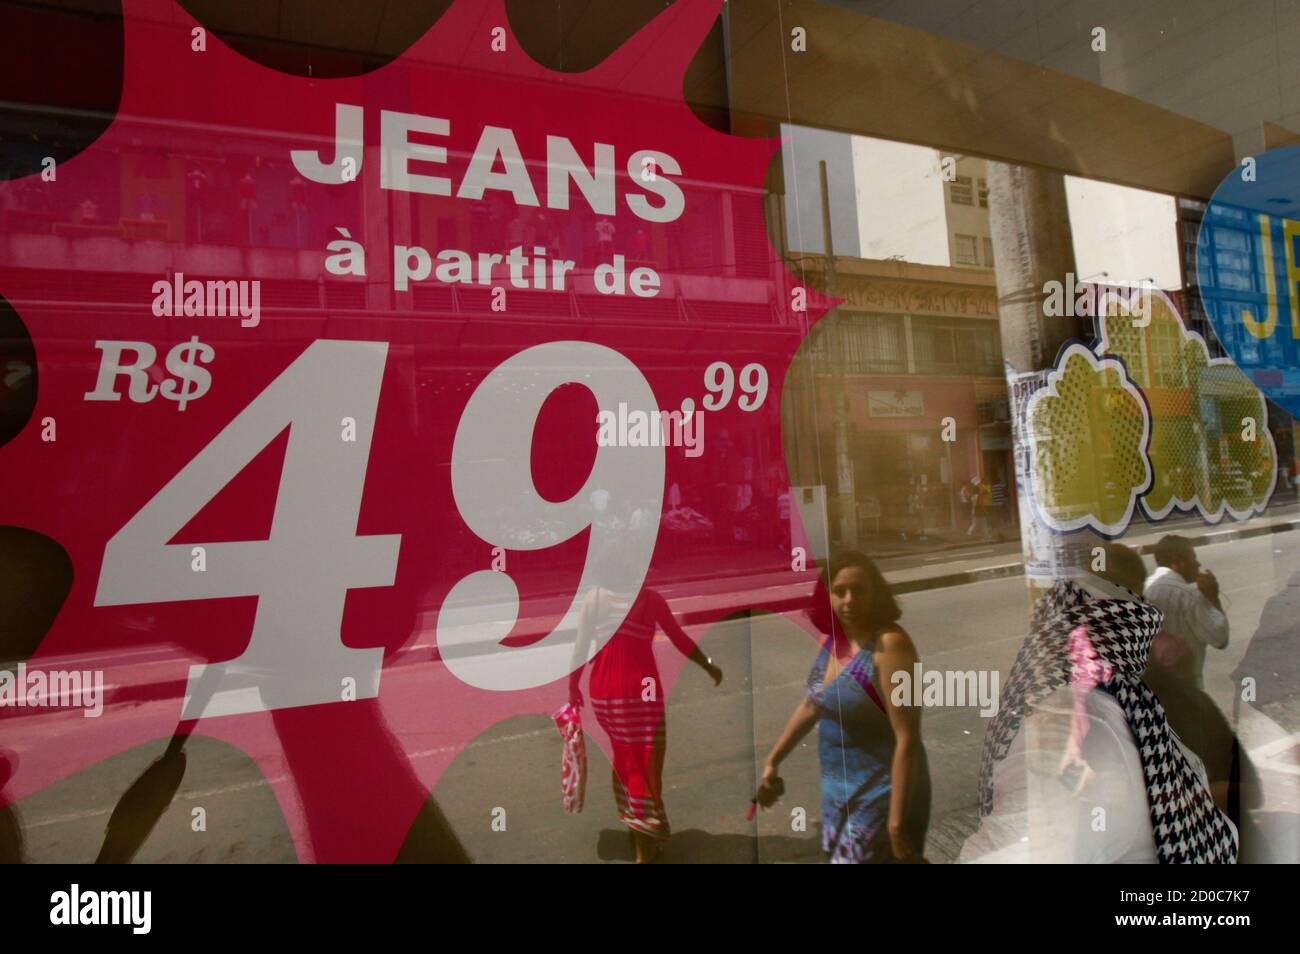 A store selling jeans displays prices in real, Brazil's currency, in Sao  Paulo April 8, 2011. Brazil's real has surged more than 2 percent against  the U.S. dollar this week as the